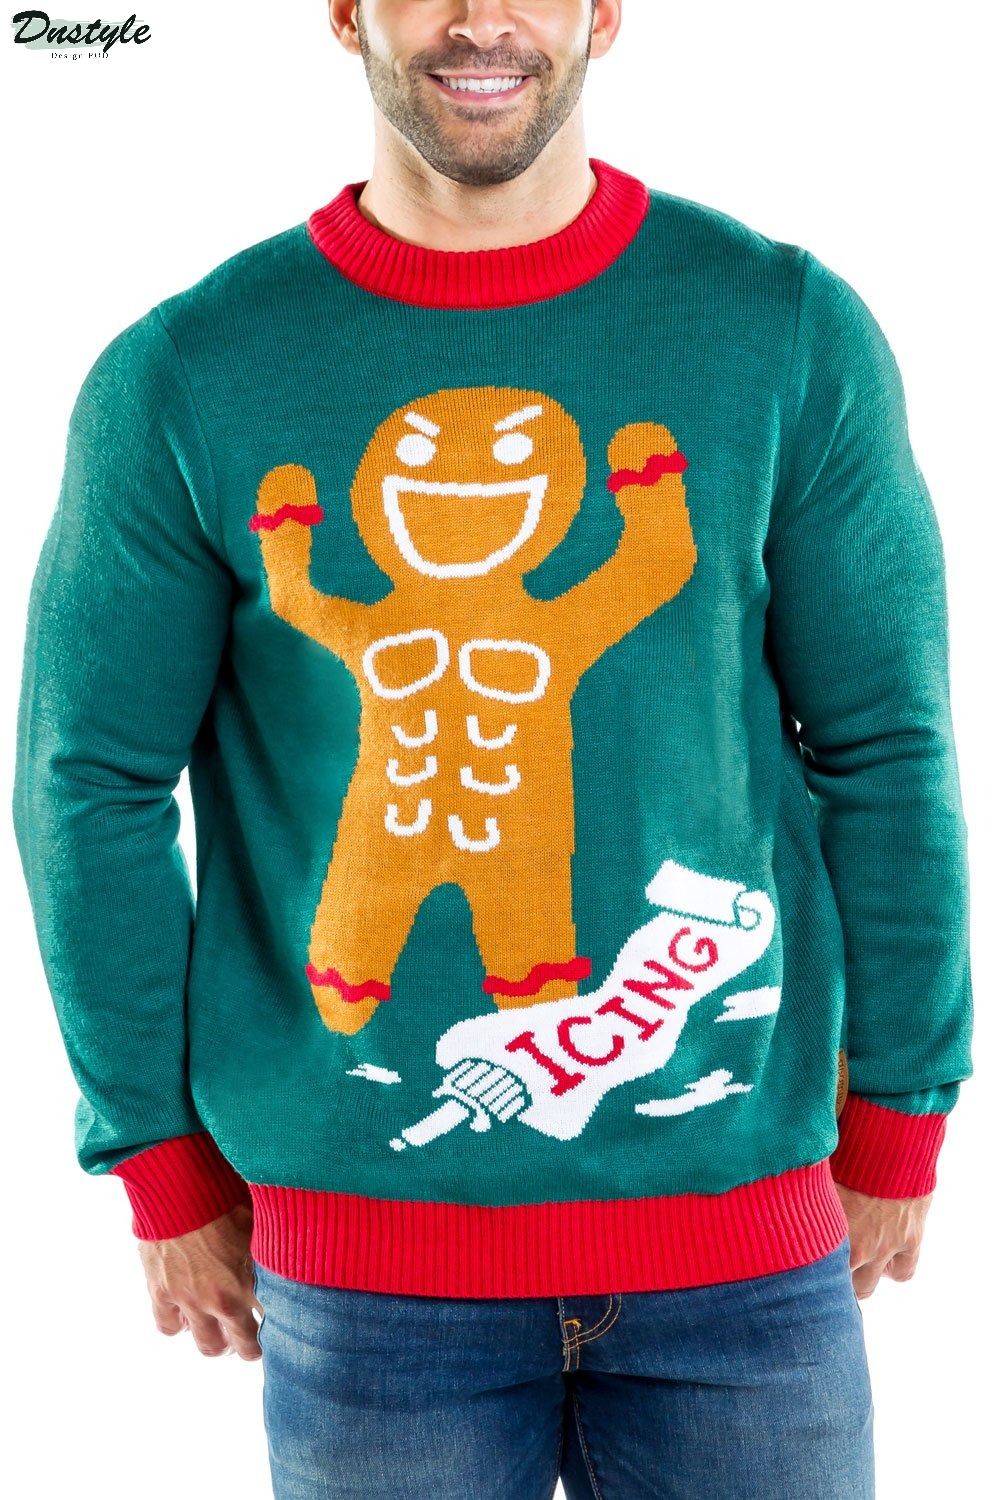 Gingerbread man roid rage ugly christmas sweater